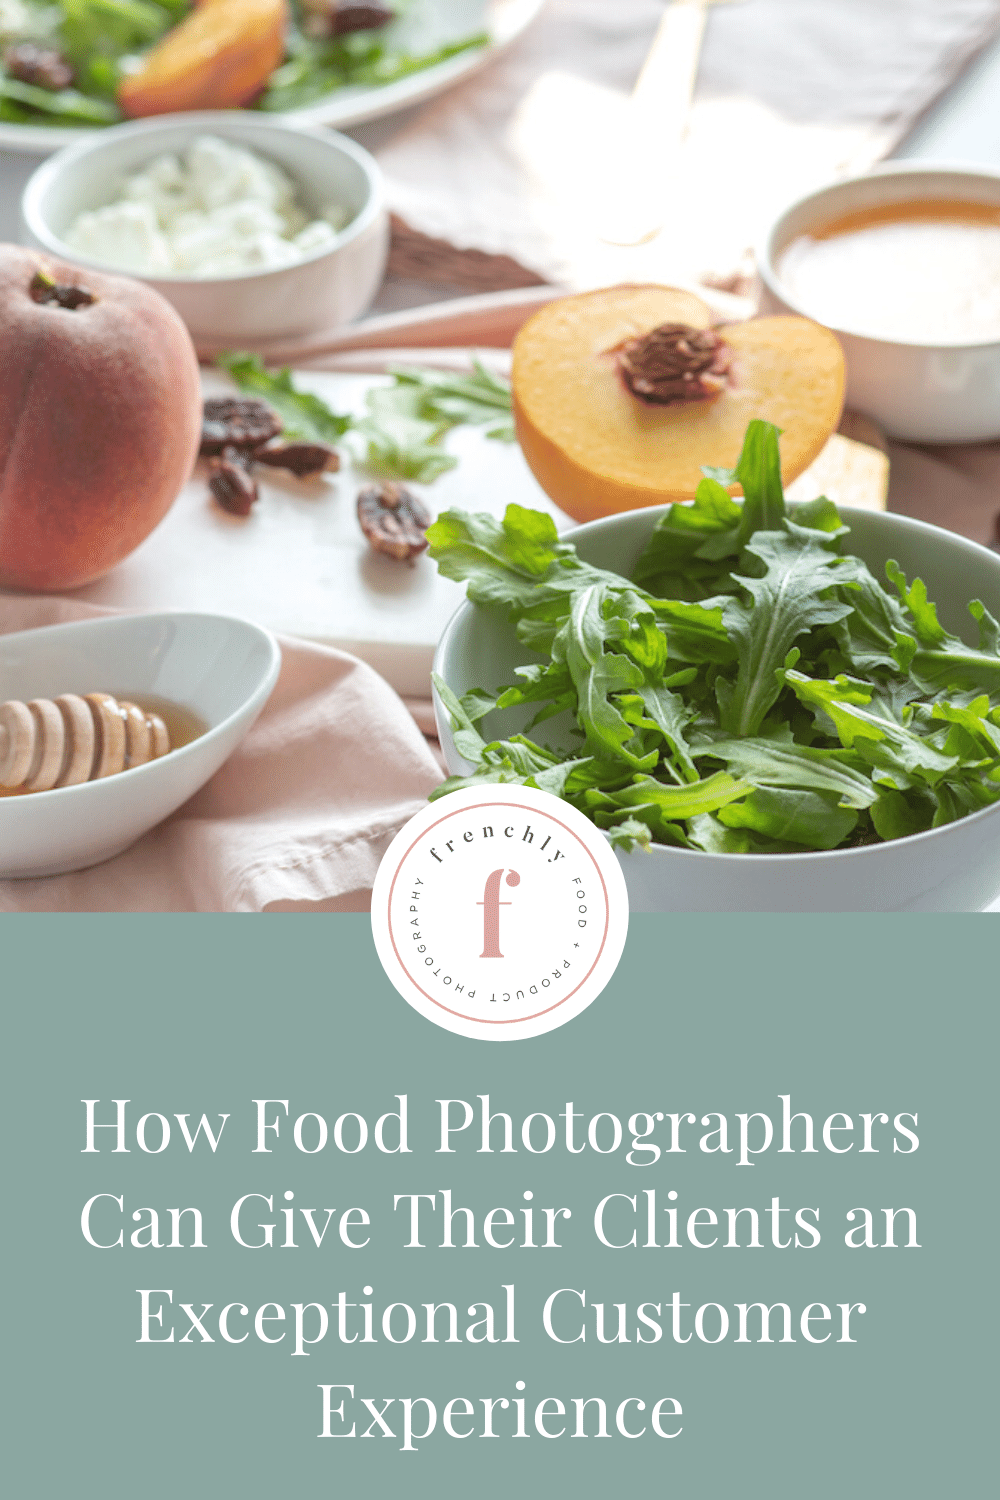 How Food Photographers Can Give Their Clients an Exceptional Customer Experience | Frenchly Food + Product Photography